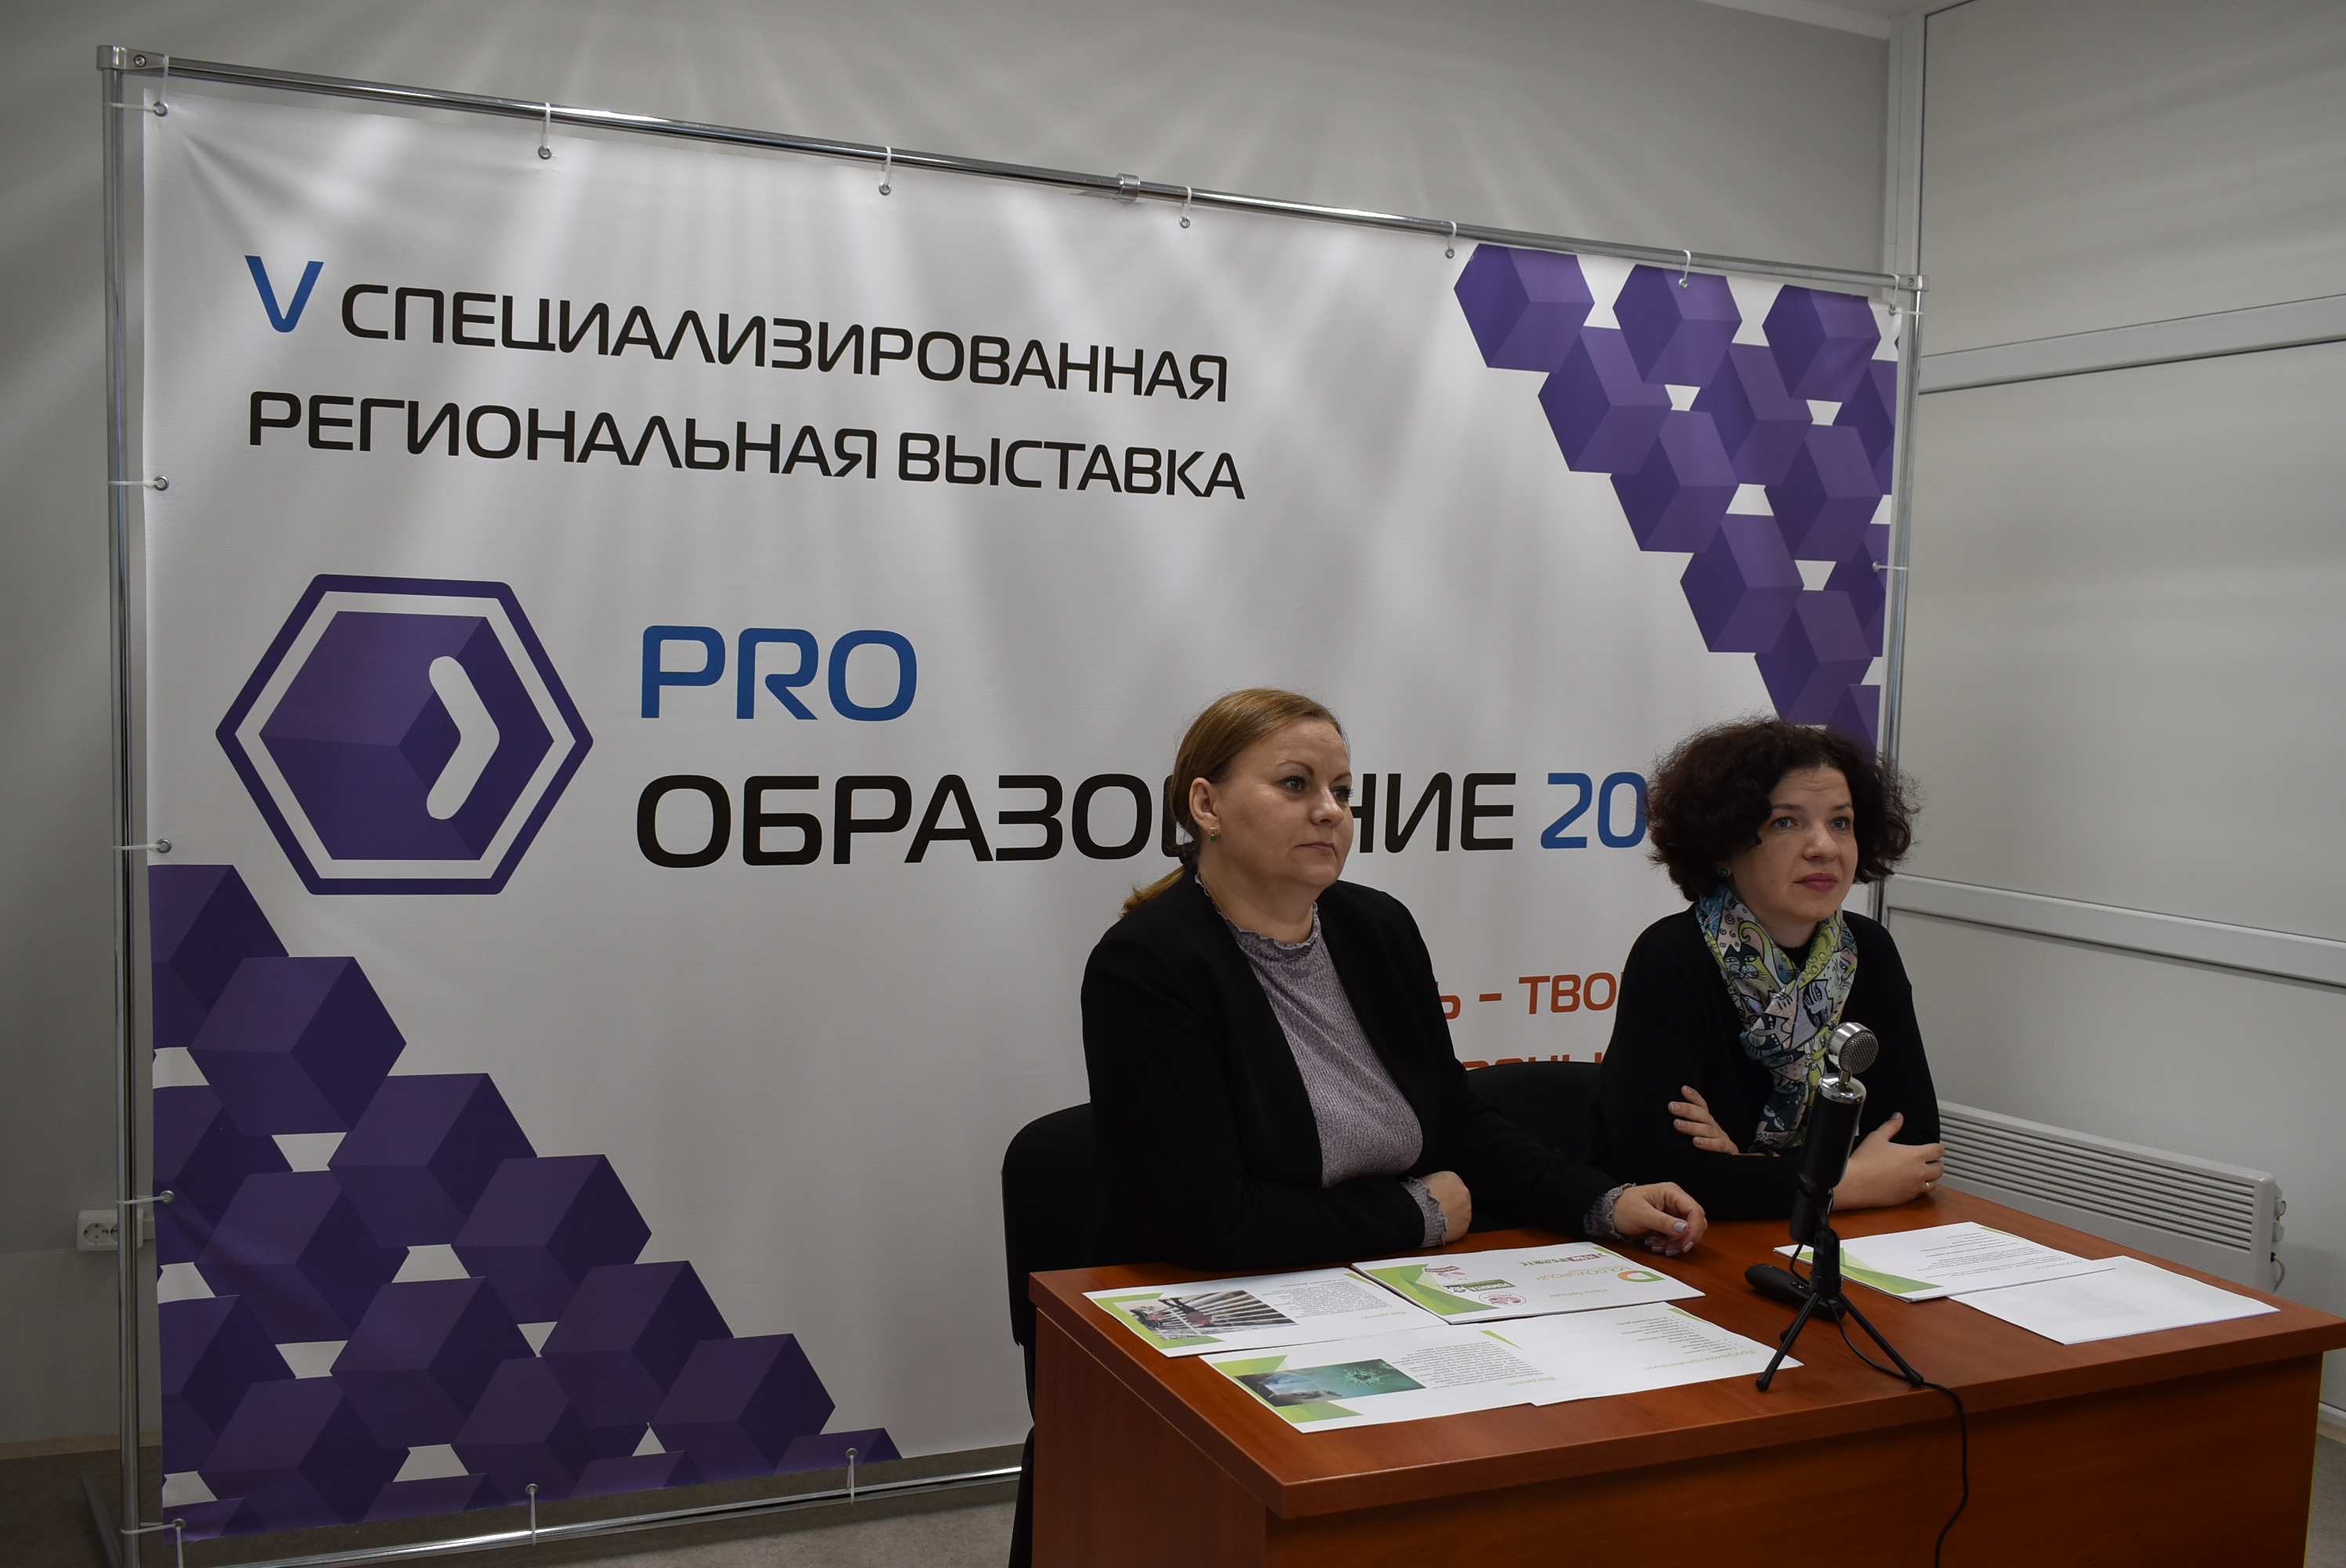 DOLGOVGROUP" TAKES PART IN THE REGIONAL PRO EDUCATION EXHIBITION